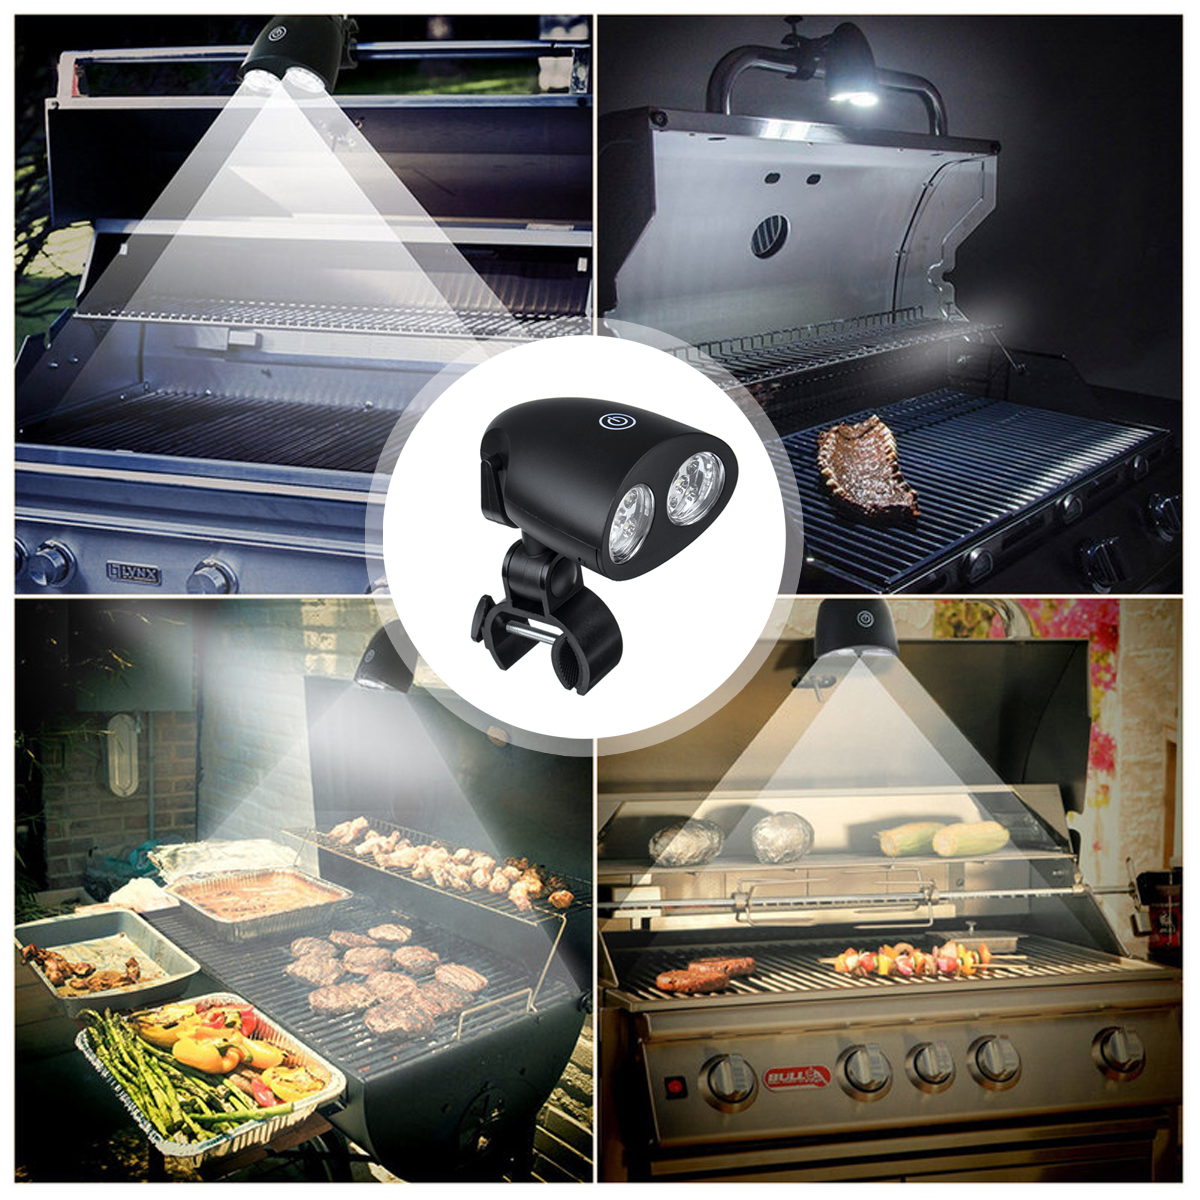 BBQ-Grill-Light-Camping-Picnic-Durable-Super-Bright-10-Led-Battery-Powered-Barbecue-Lamp-1613019-7